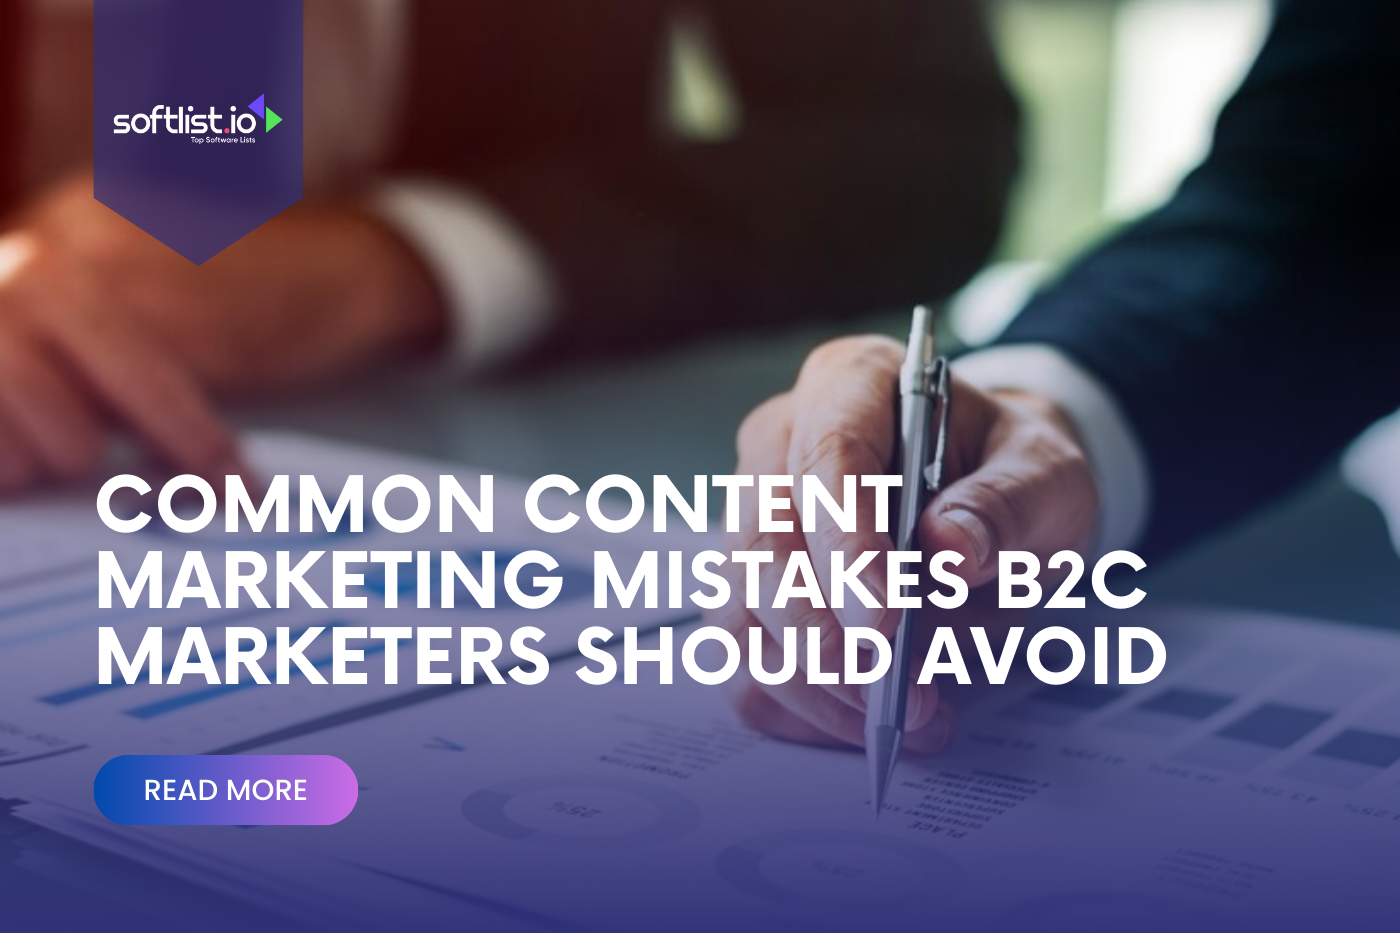 Common Content Marketing Mistakes B2C Marketers Should Avoid